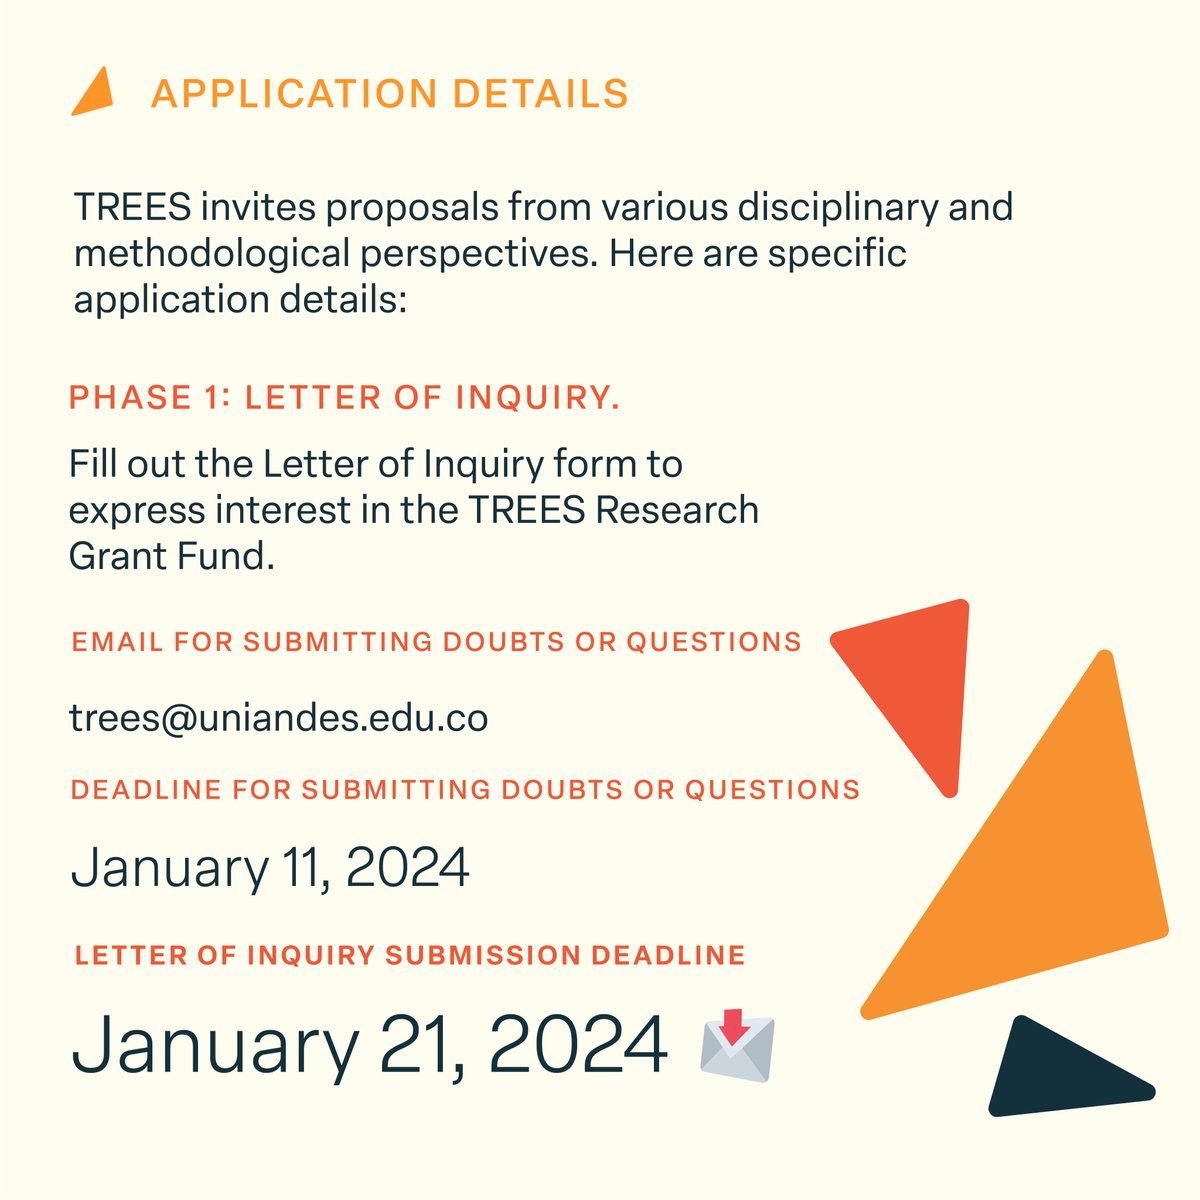 🌟 Exciting news! The II TREES Research Grant Fund is now accepting Letter of Inquiry submissions! 🌍✨
🔗 For all necessary information and the submission form, visit: shorturl.at/befk1
#TREESResearchGrantFund #InequalityStudies #ResearchOpportunity